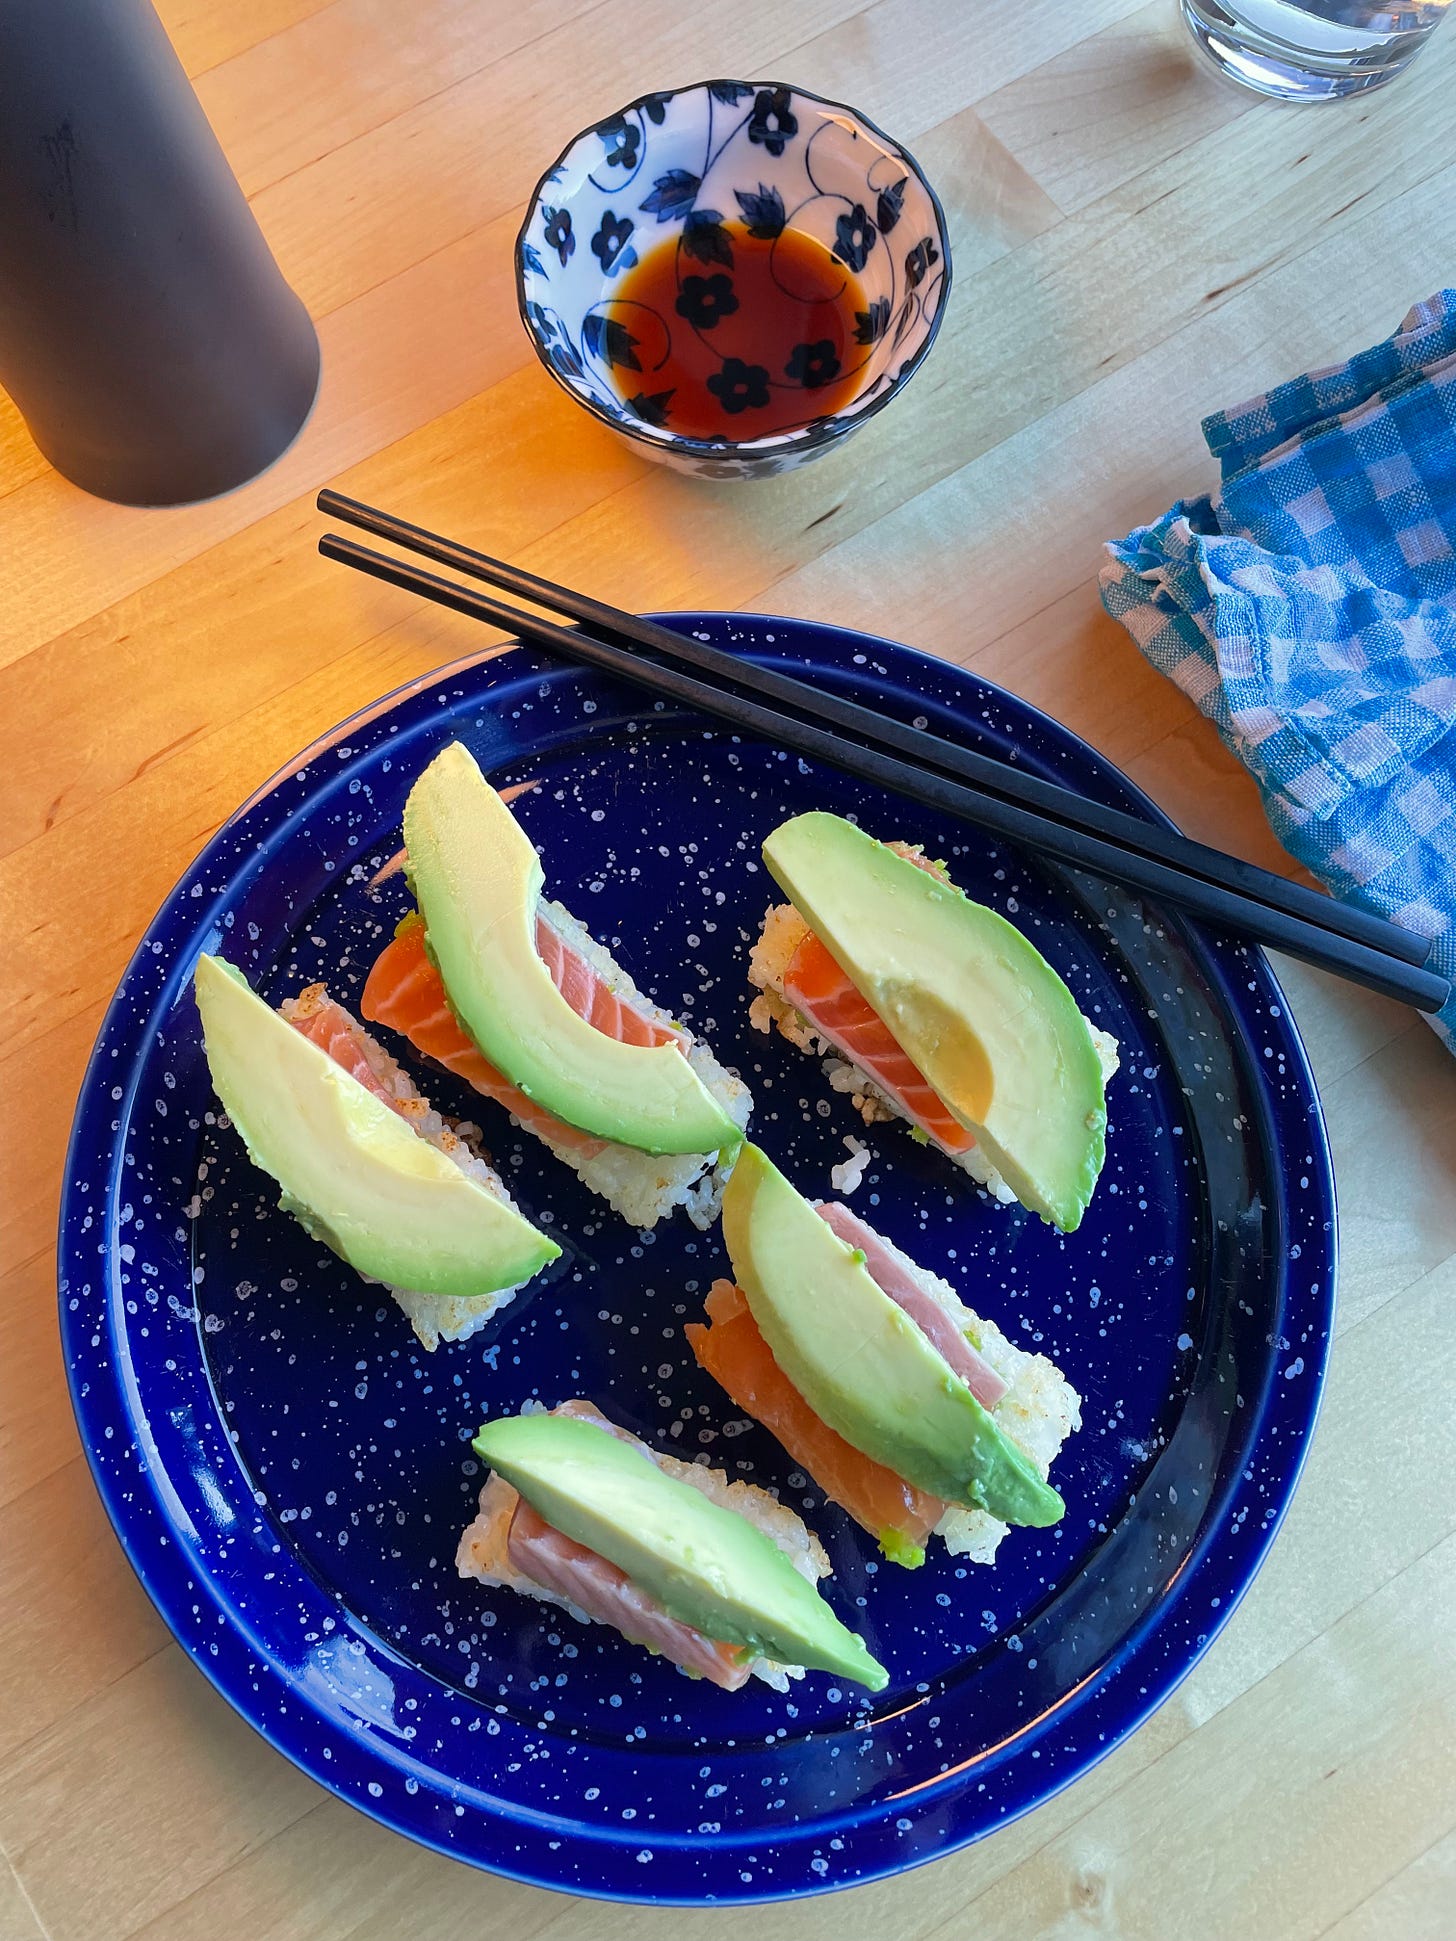 Speckled plate with crispy rice rectangles topped with sliced salmon sashimi and avocado. Some soy sauce and chopsticks nearby.